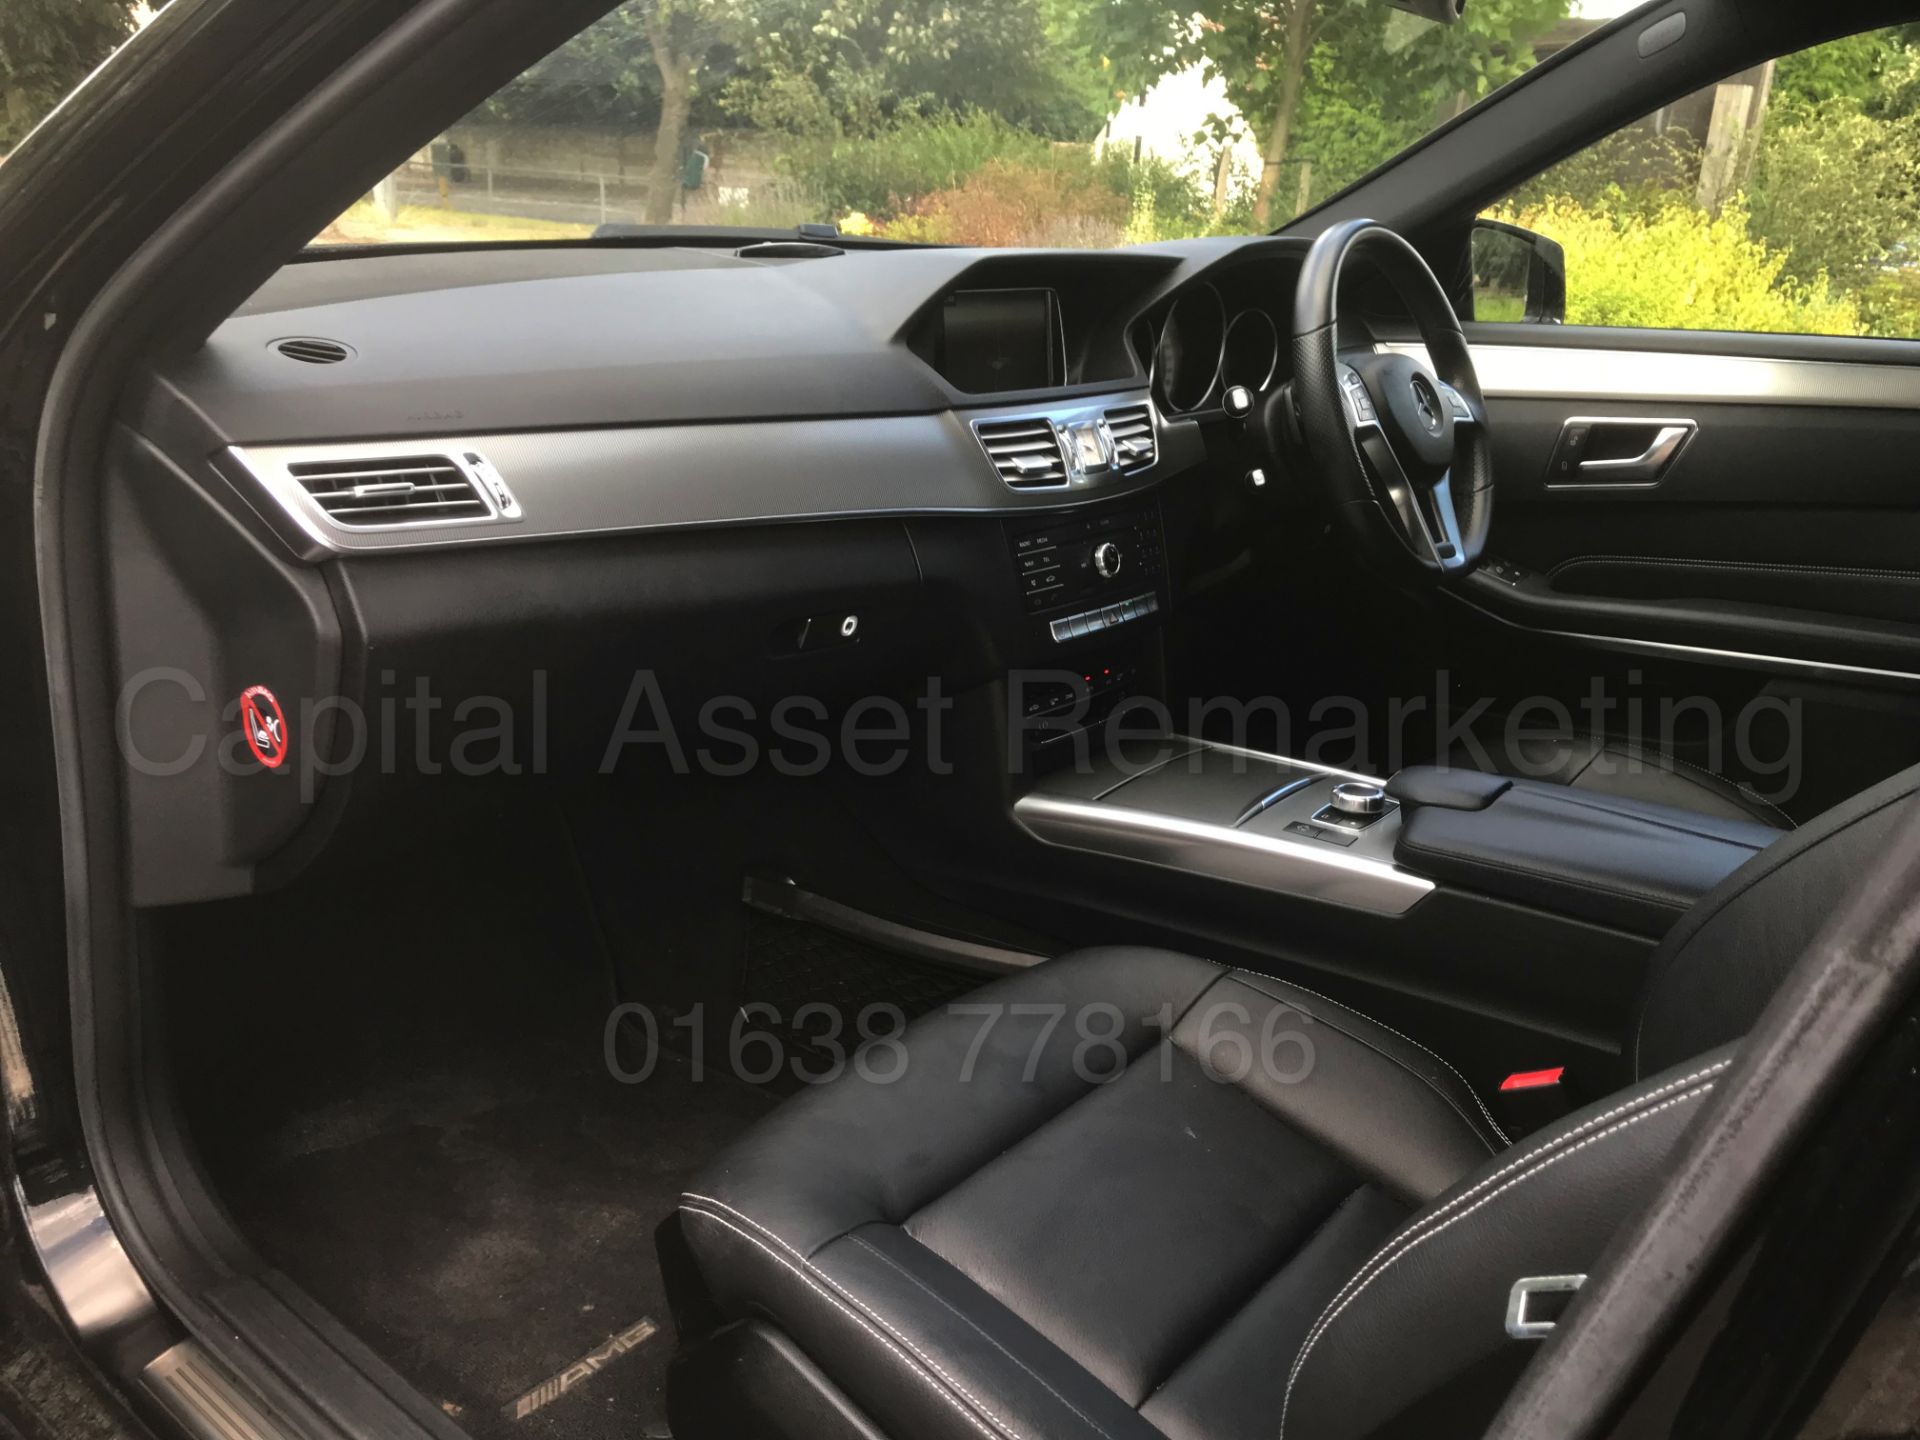 MERCEDES-BENZ E220D *AMG - NIGHT EDITION* SALOON (2016) '7G AUTO - LEATHER - SAT NAV' *LOW MILES* - Image 20 of 43